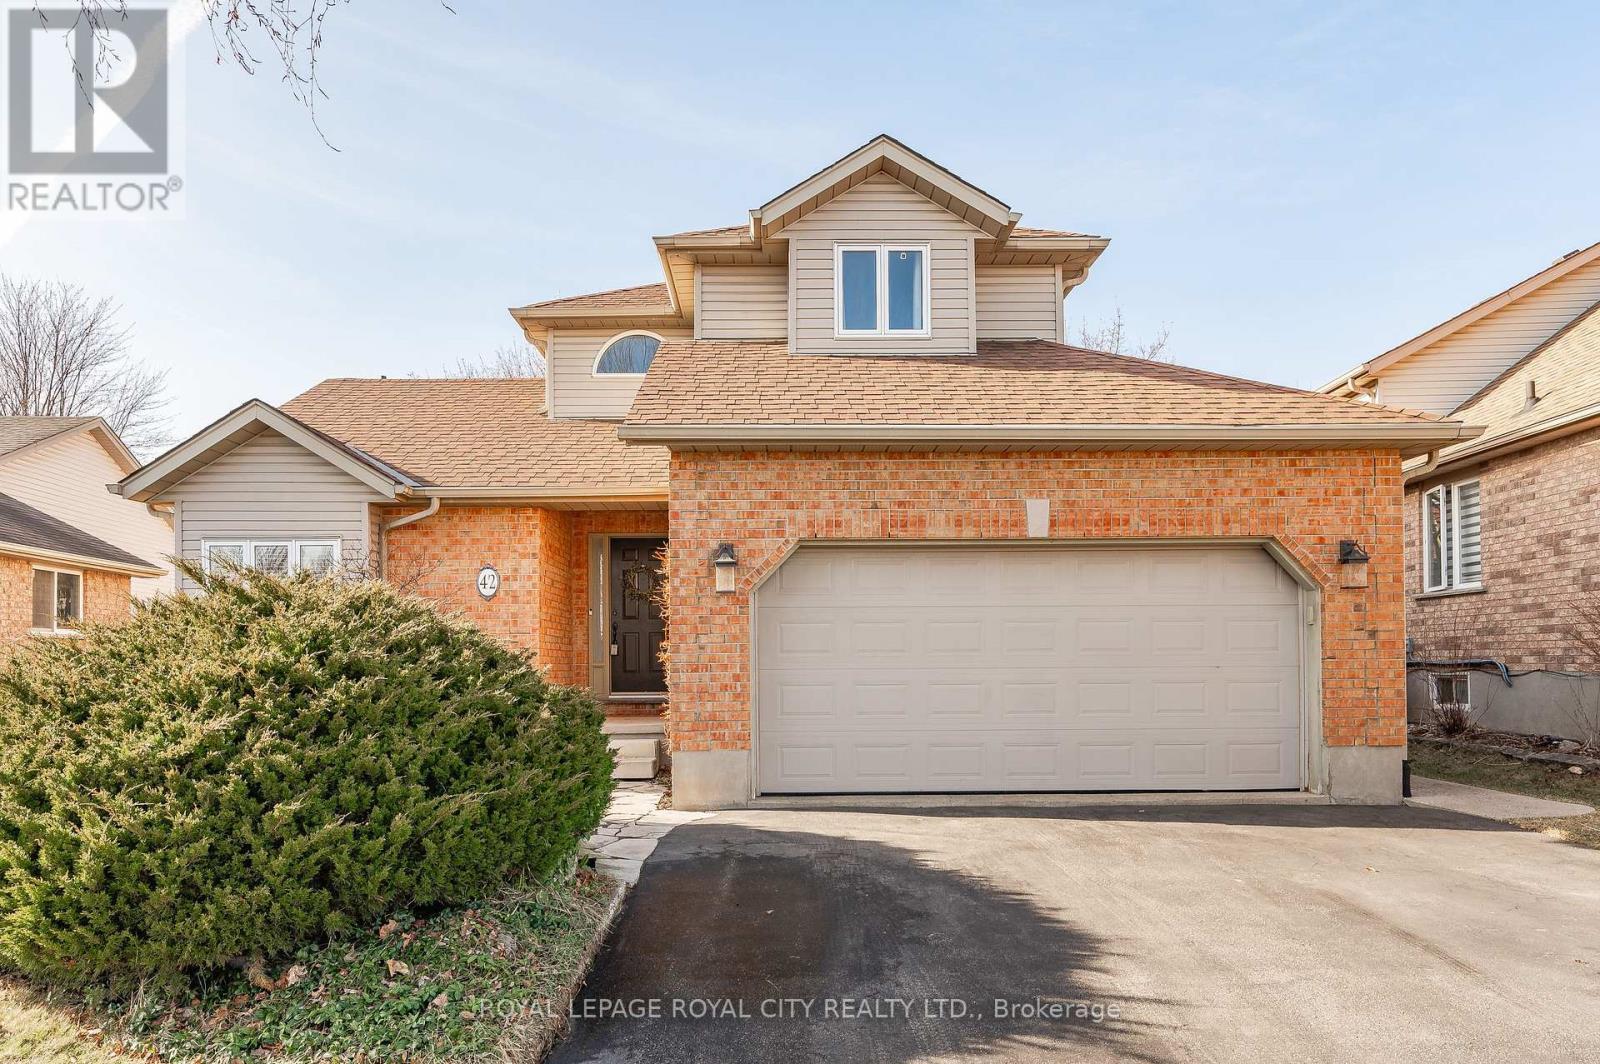 












42 PEARTREE CRES

,
Guelph,




Ontario
N1H8J2

